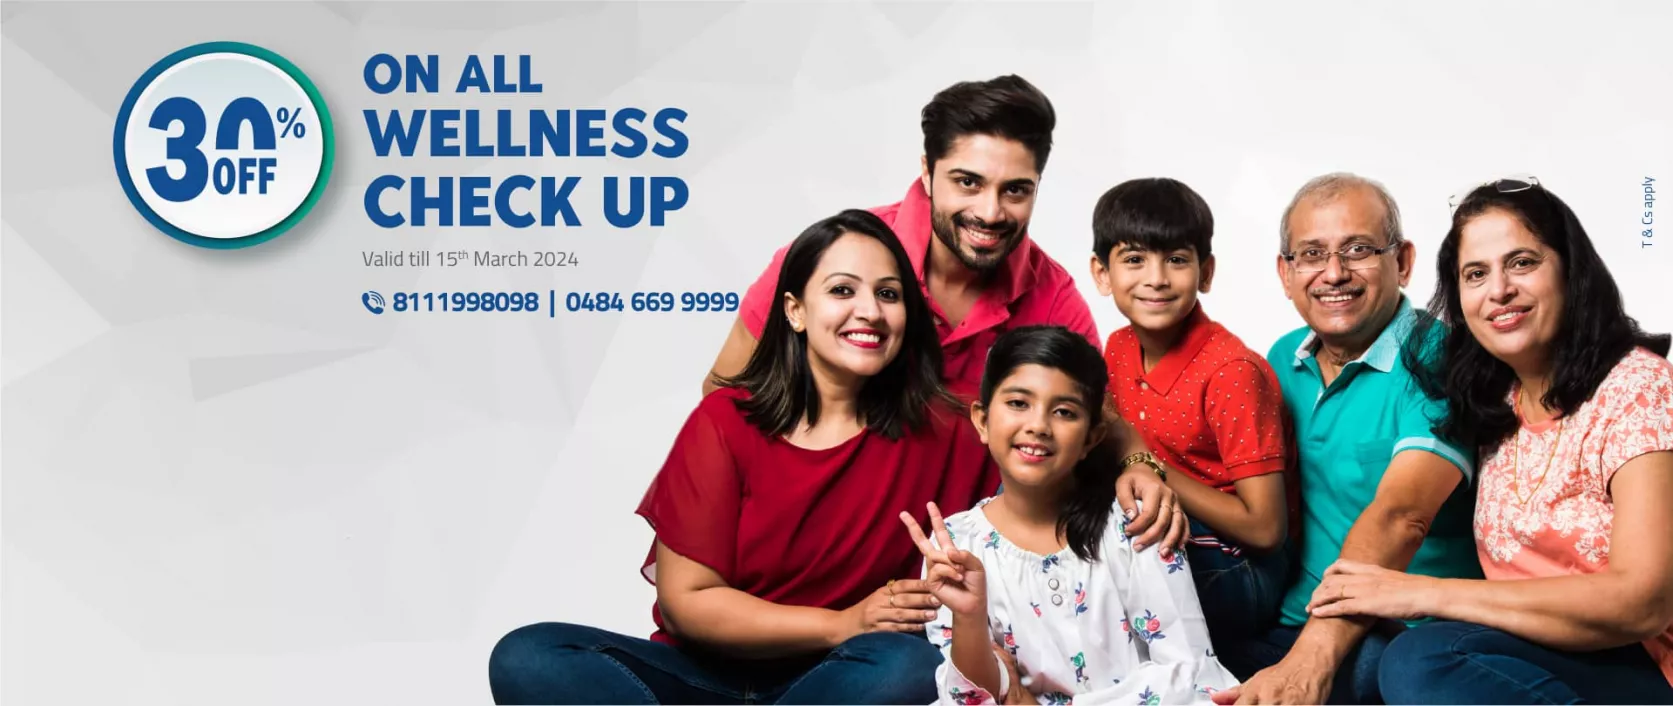 Aster Medcity Kochi Wellness Checkup Package Offer